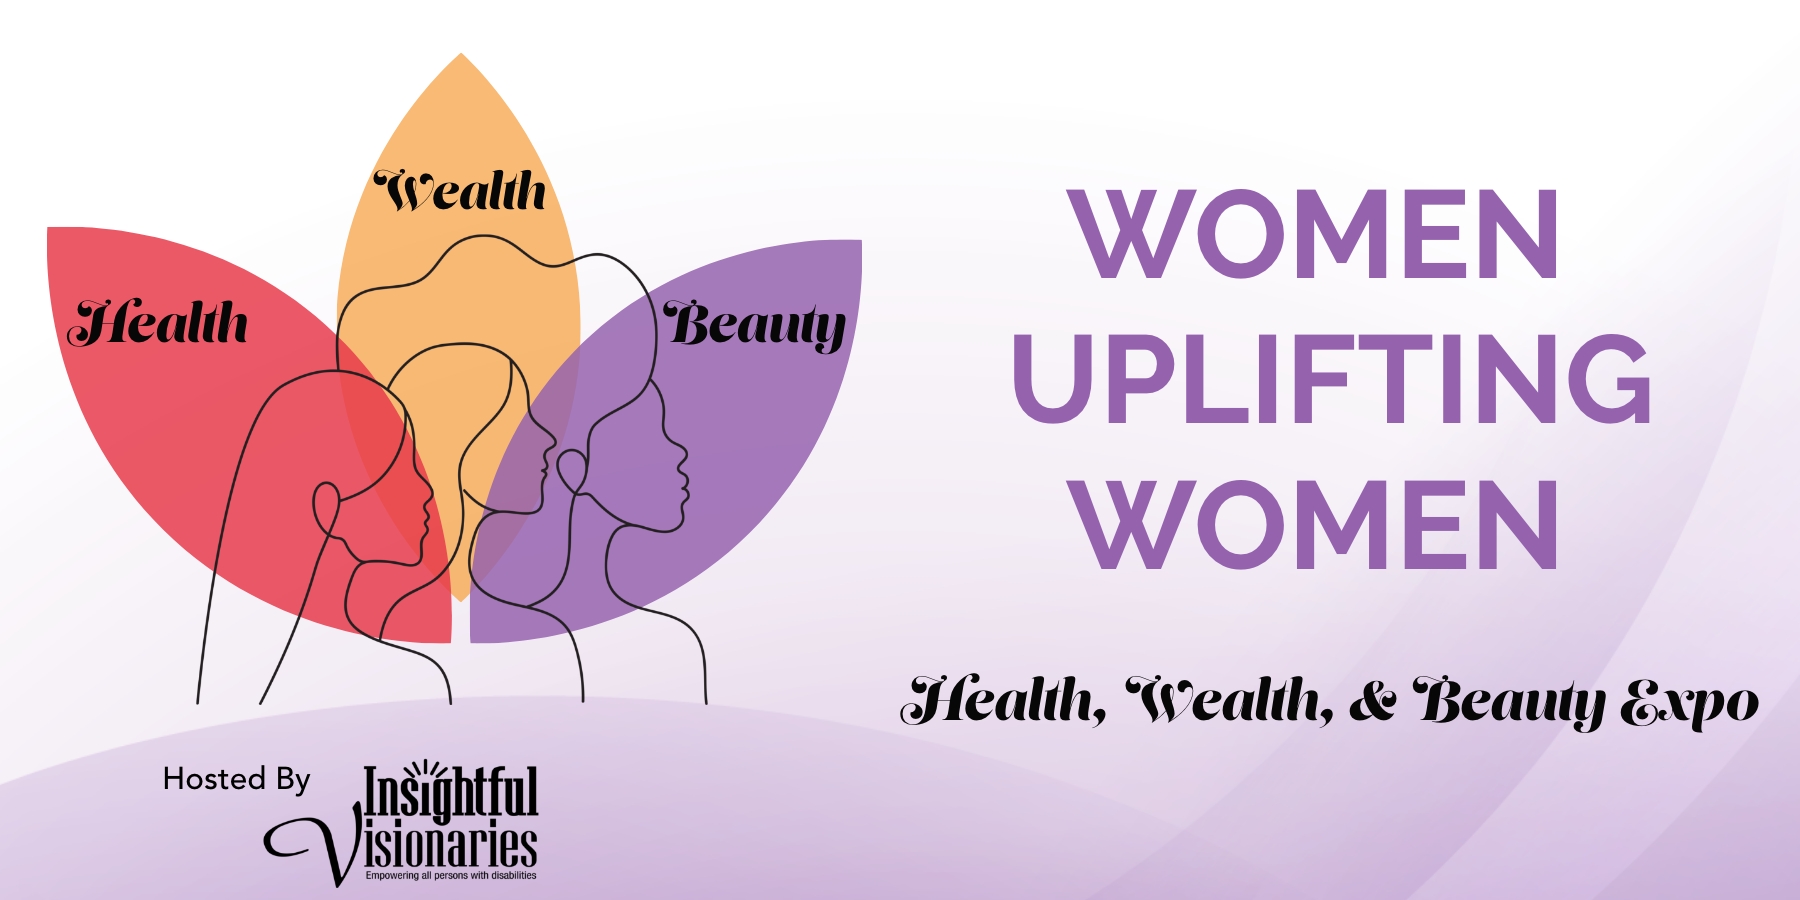 Featured image for “2nd Annual Women Uplifting Women Health, Wealth, & Beauty Expo To Be Held On Saturday, September 30 in Raleigh, NC”